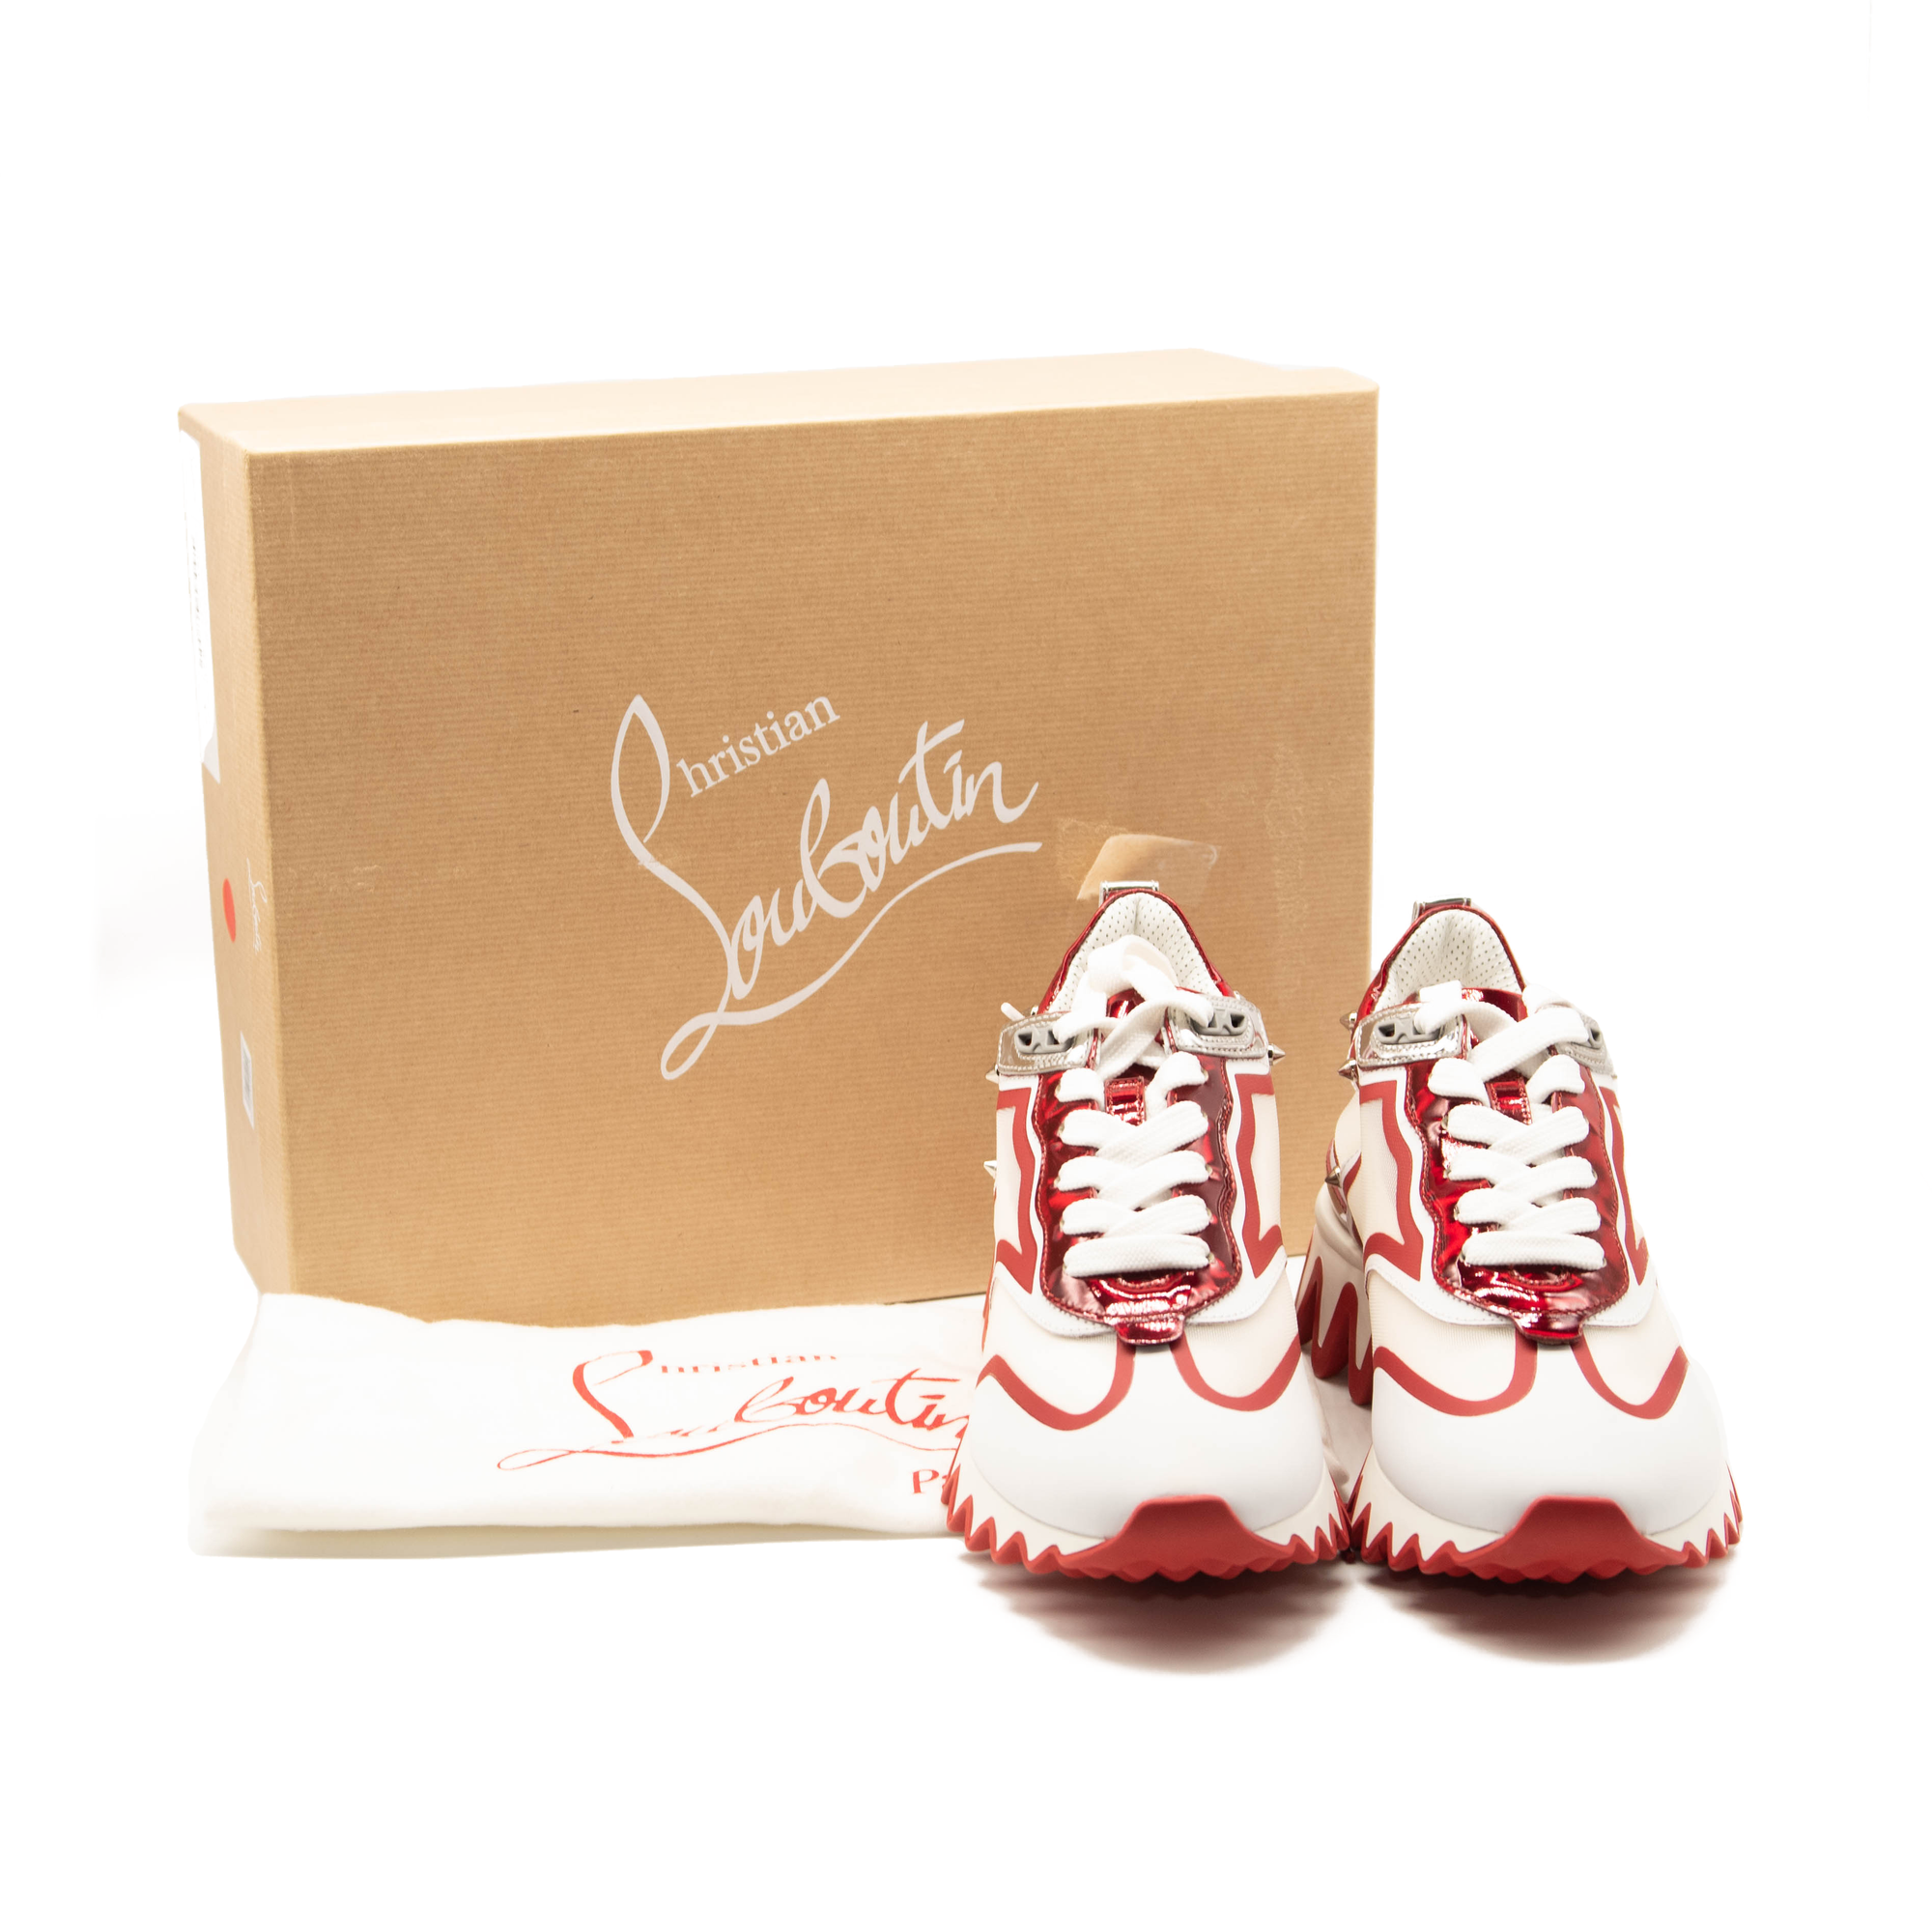 NEW Louboutin Sneaker White Red 39.5 MyDesignerly